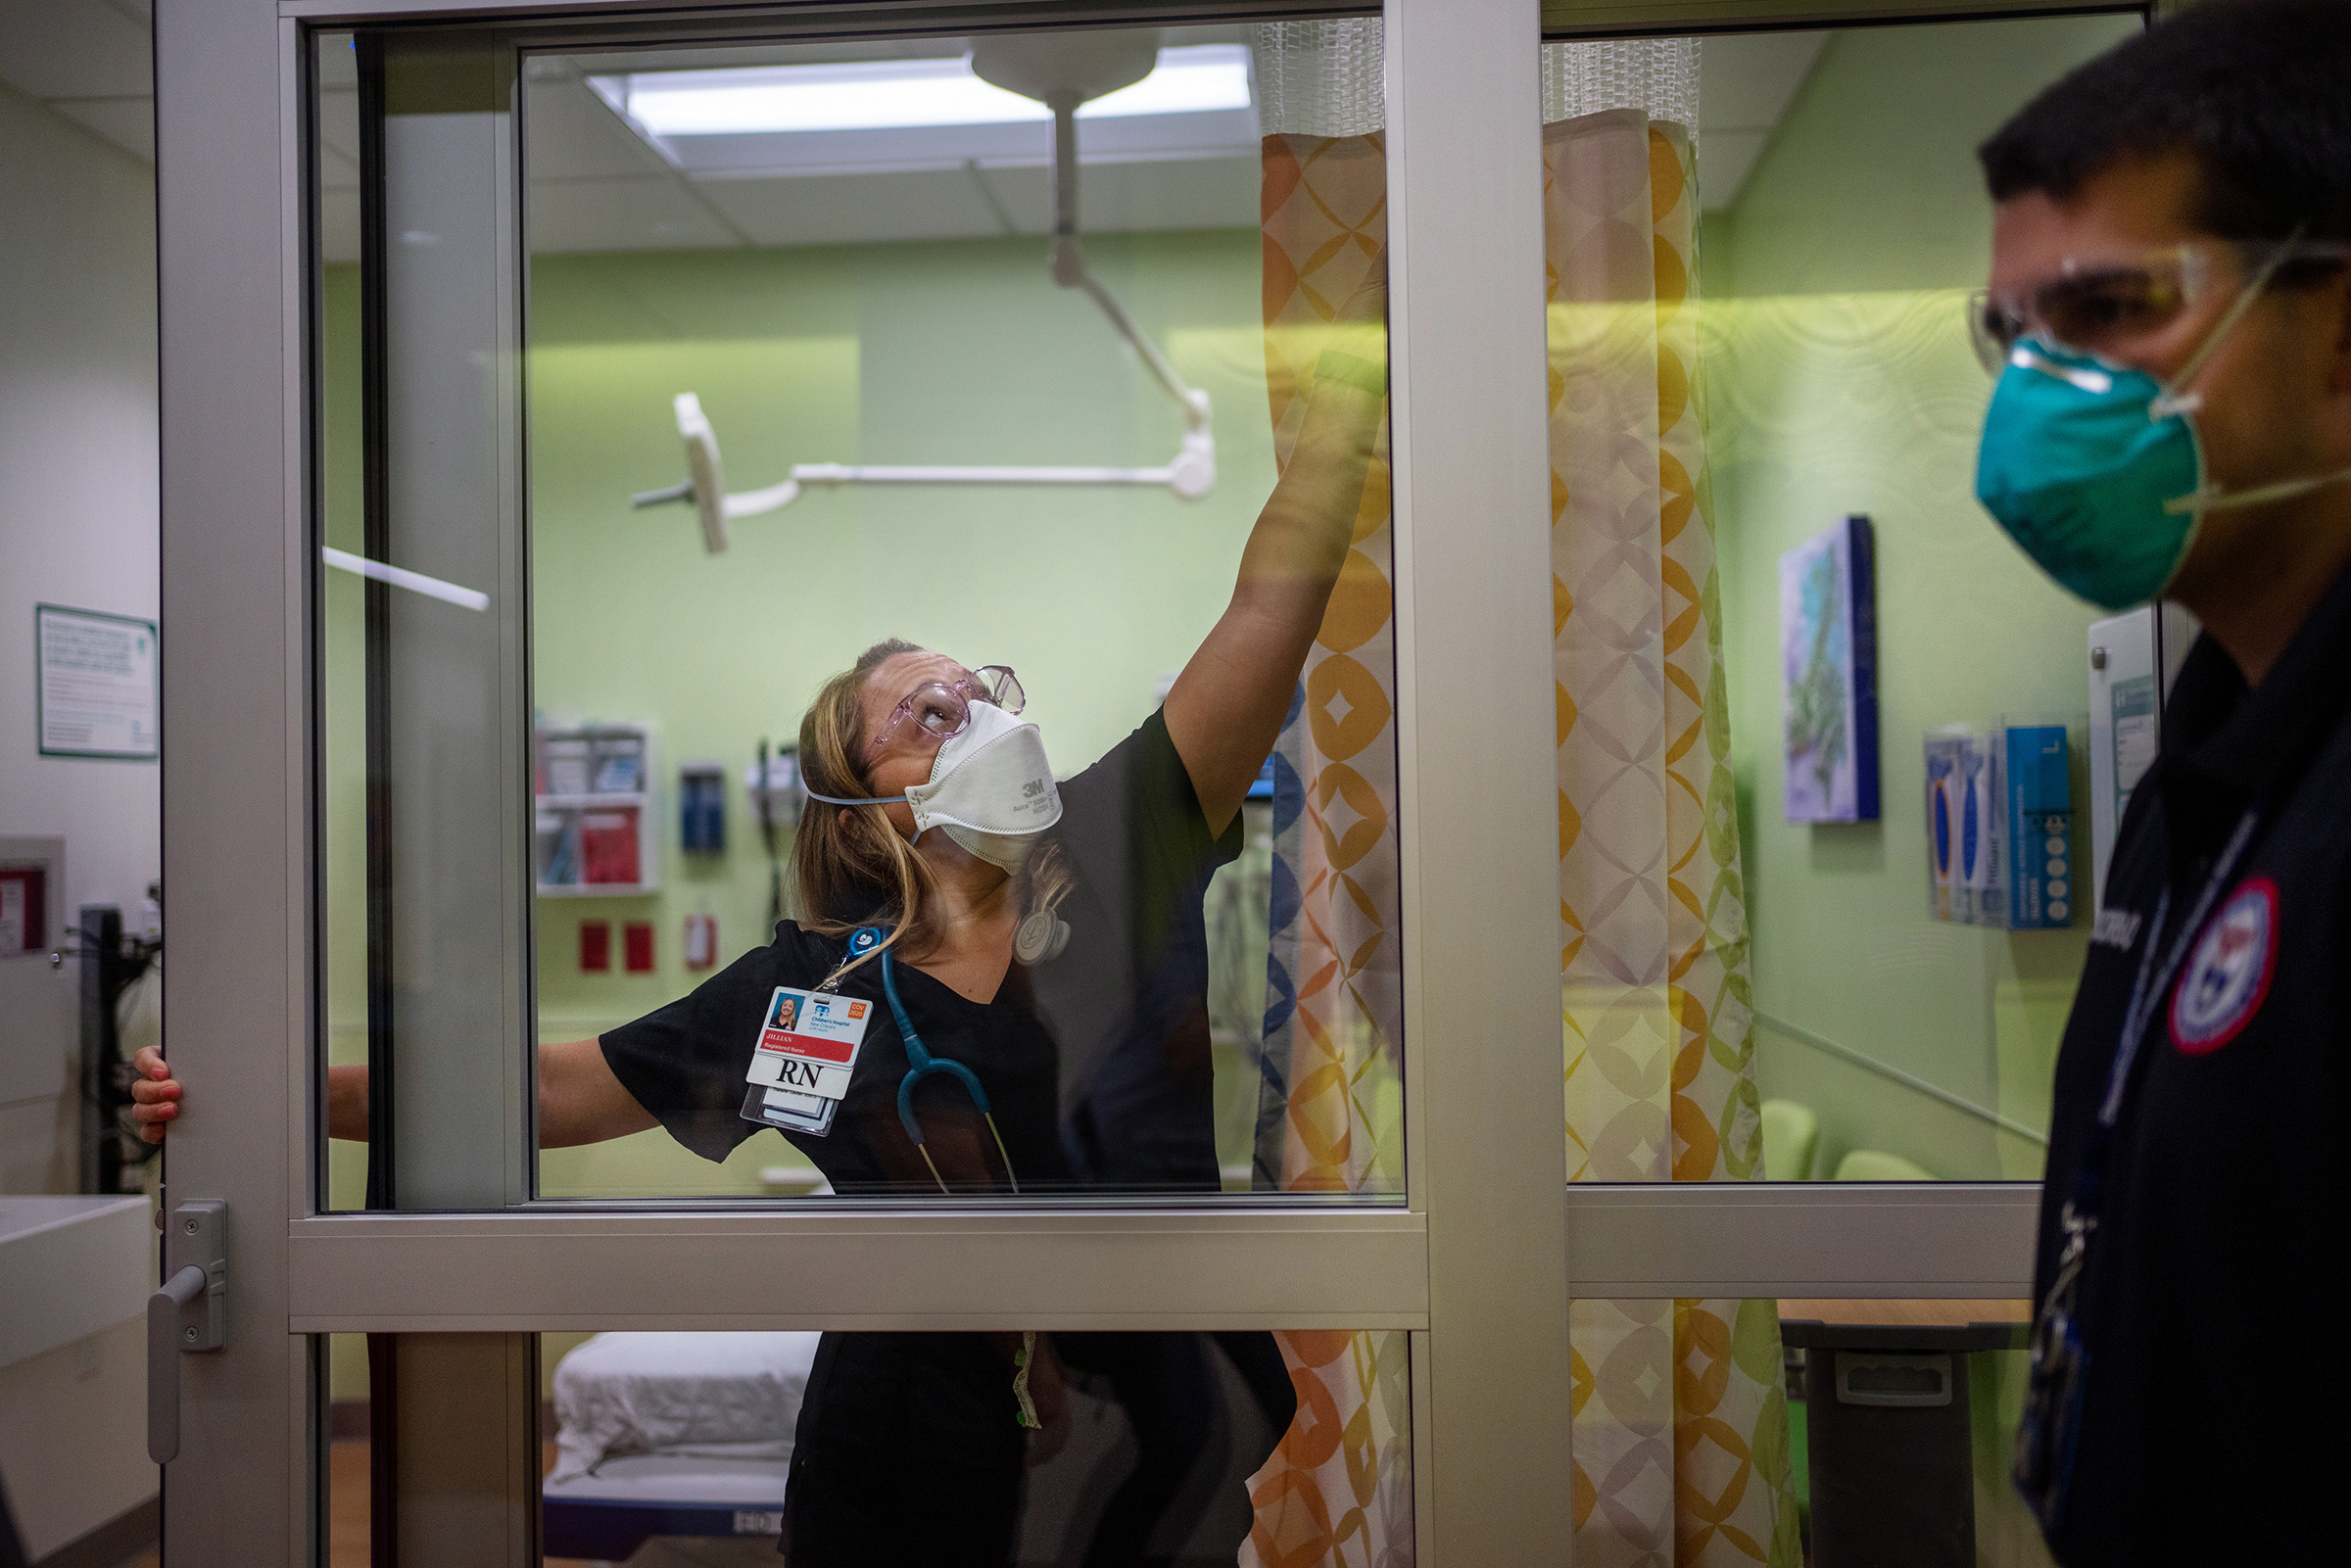 Jillian Nickerson tries to fix a stuck door in a newly opened room in the emergency department at Children’s Hospital New Orleans on Aug. 20, while Paul Decerbo from the Rhode Island-1 Disaster Medical Assistance Team looks on. (Kathleen Flynn for TIME)